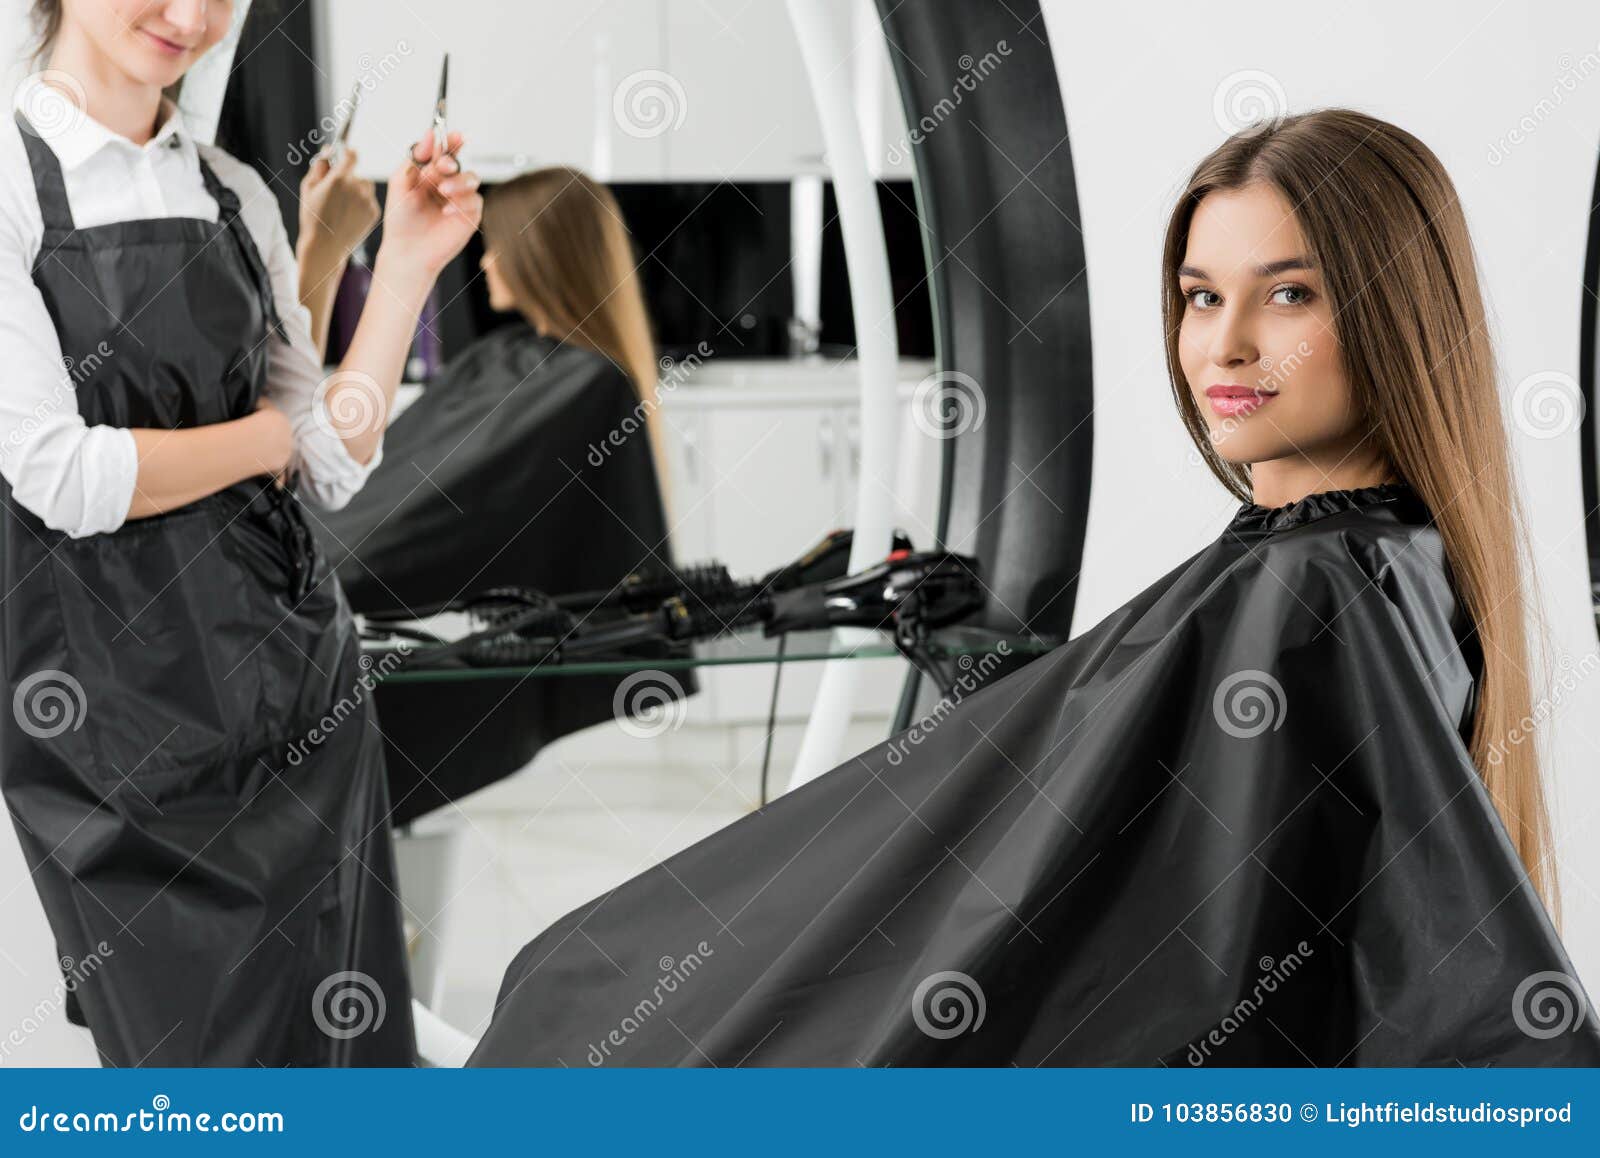 young woman with hair stylist